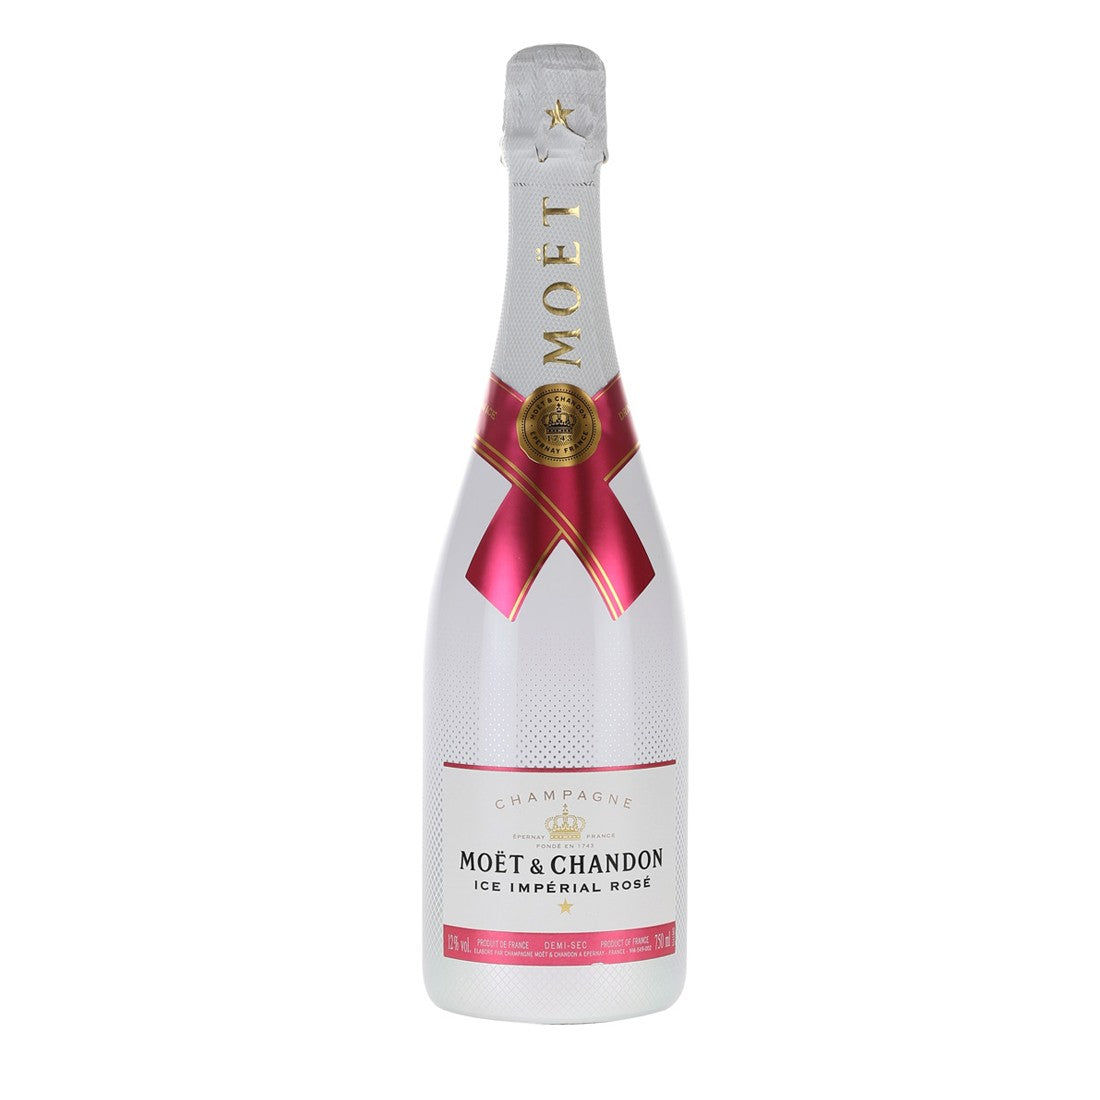 Moet & Chandon Ice Imperial Rosè